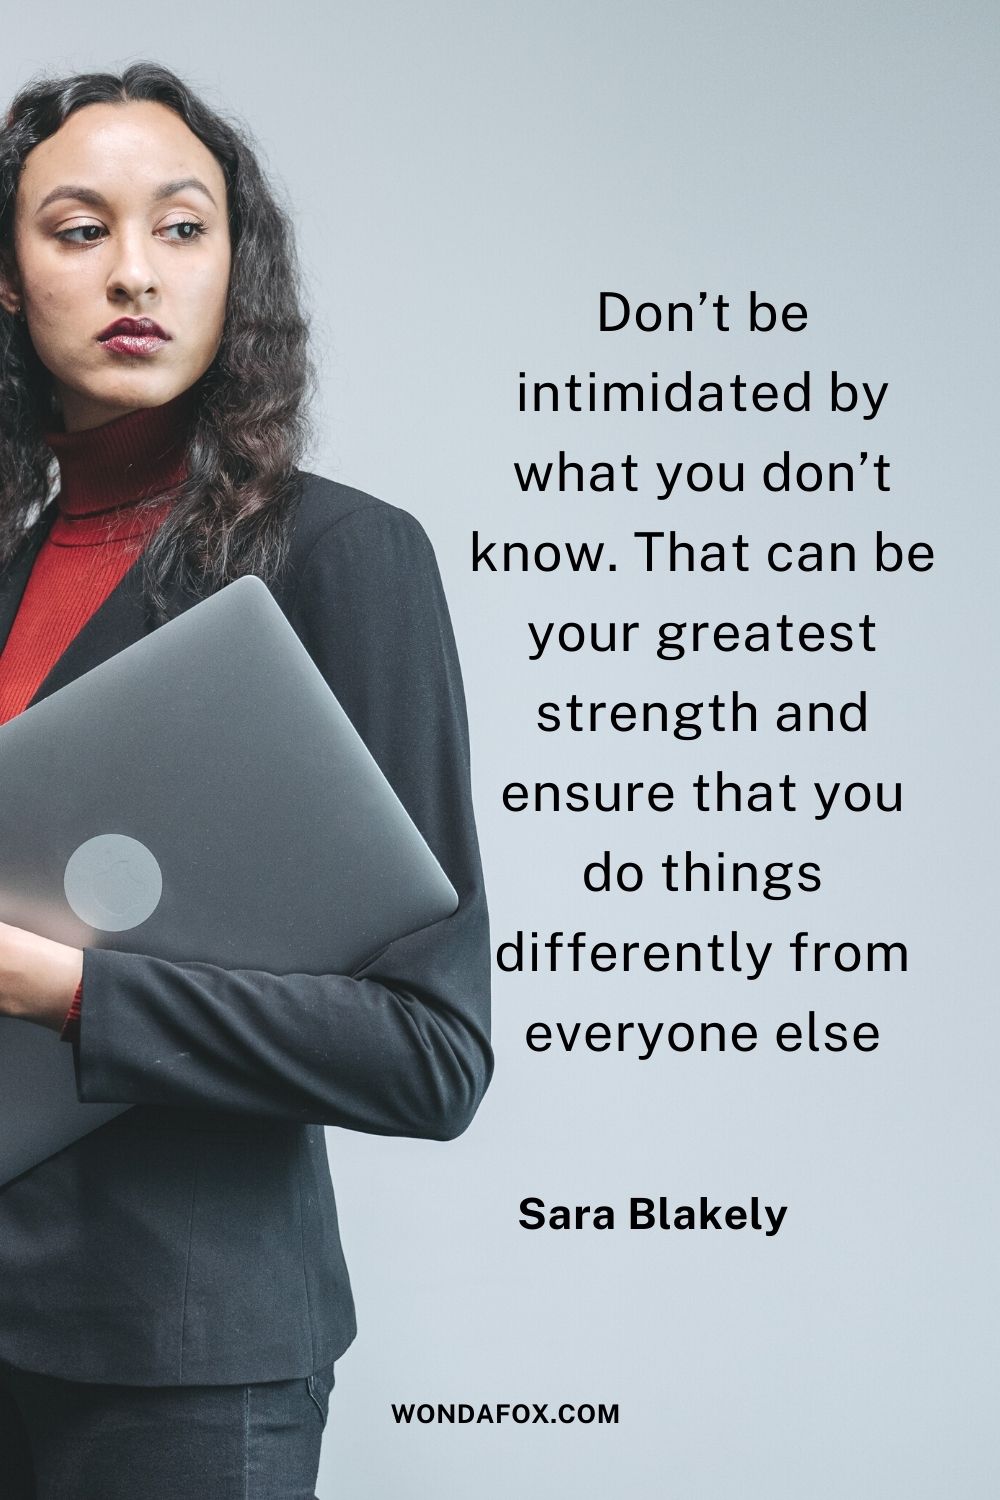 Don’t be intimidated by what you don’t know. That can be your greatest strength and ensure that you do things differently from everyone else